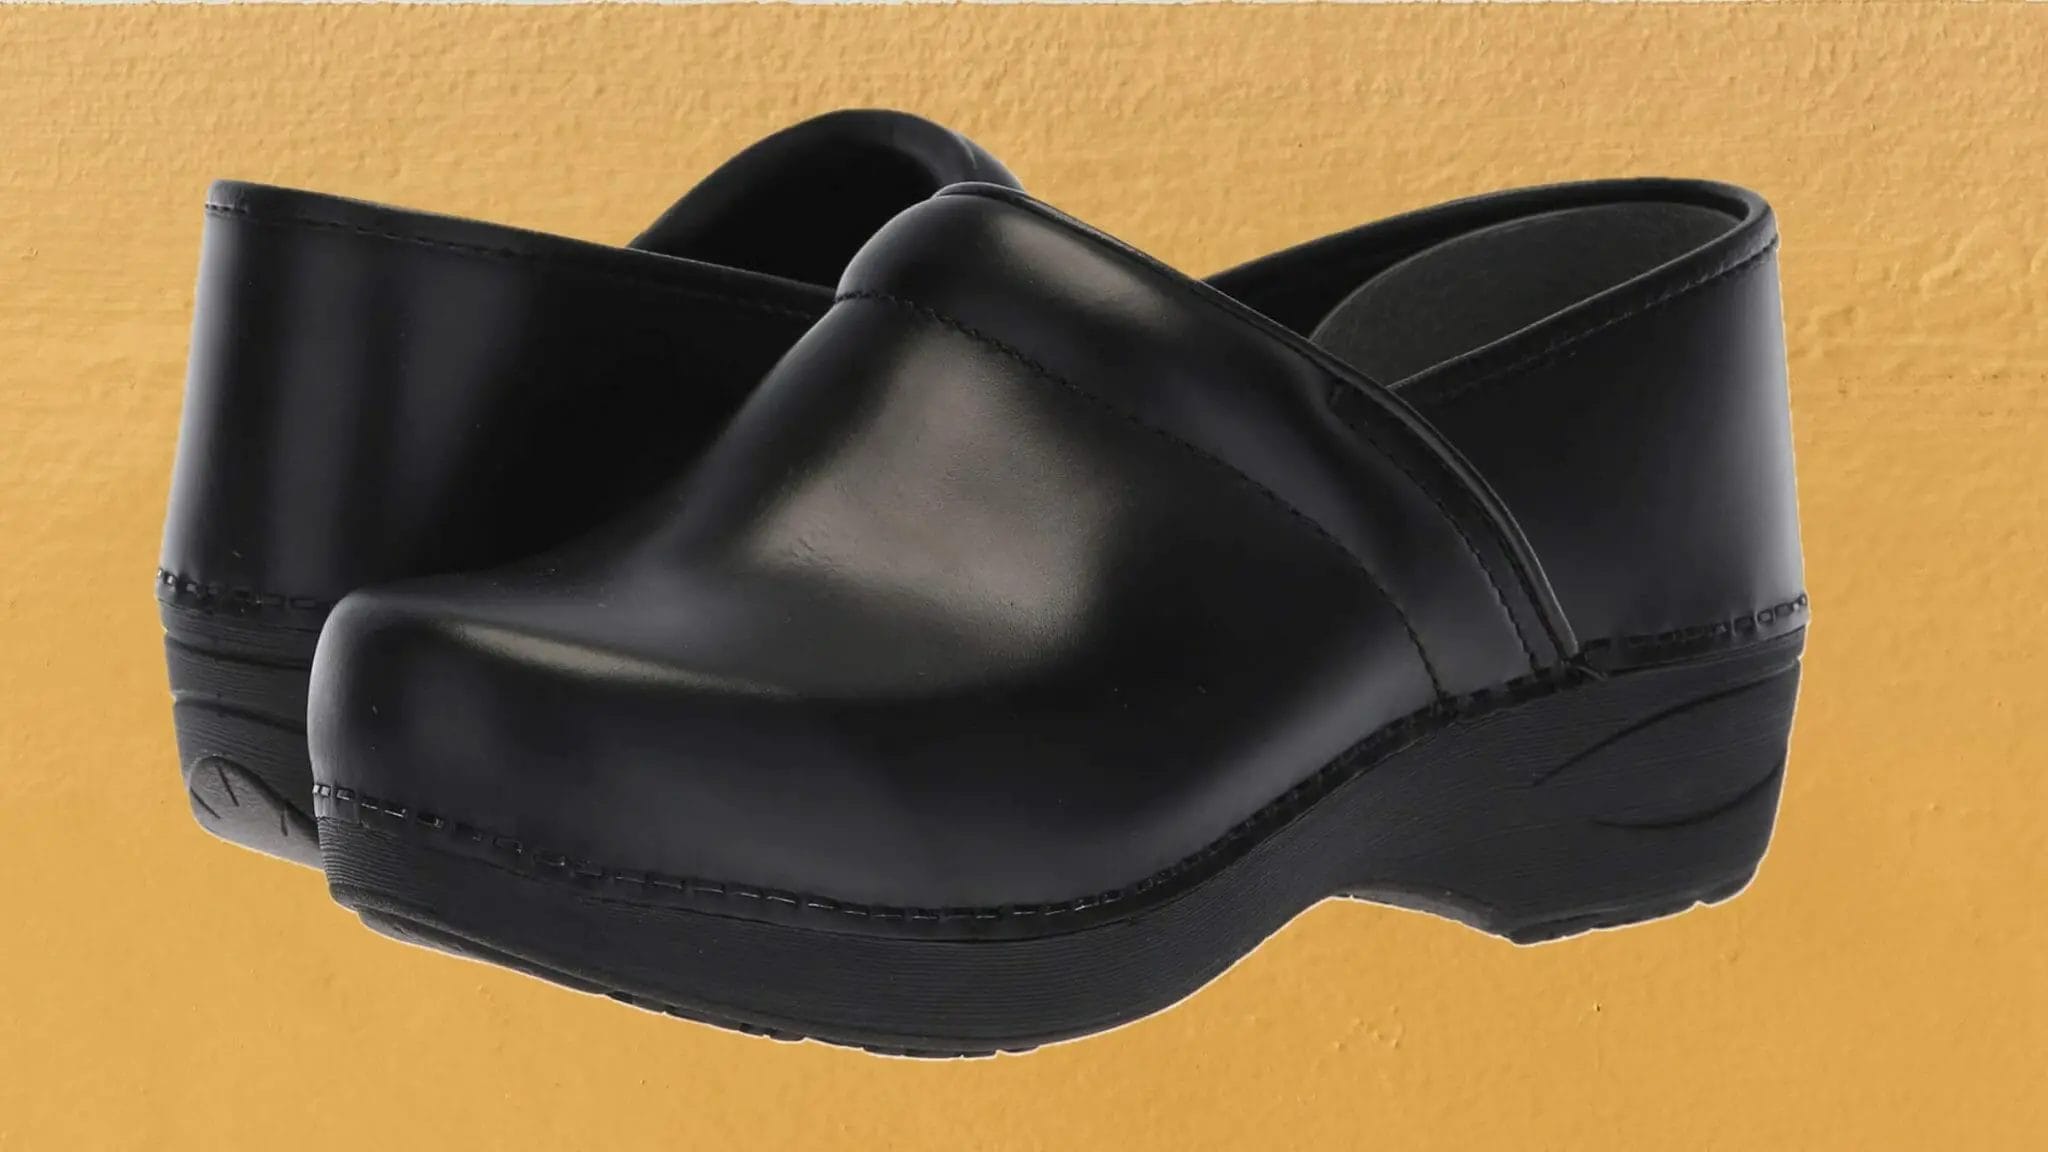 Pair of Dansko XP 2.0 non-slip clogs for chefs and kitchen work